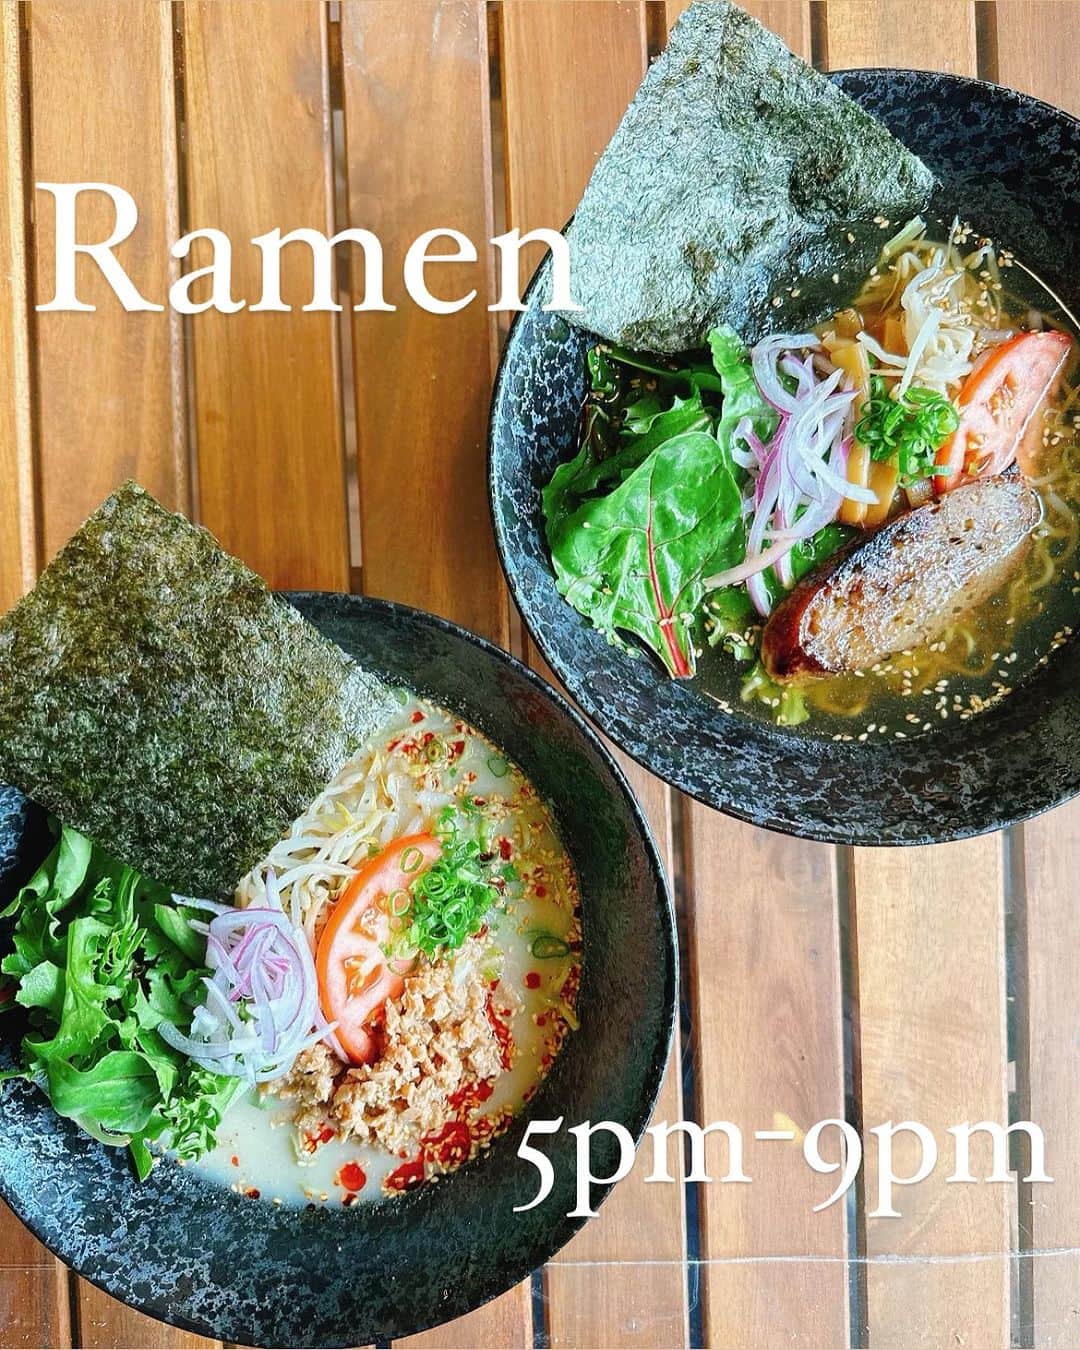 Peace Cafeのインスタグラム：「100%plant-based, vegan ramen available after 5pm, takeout also available! Flavors include soy sauce, yuzu salt, tantan, and spicy tantan! Come try this delicious, healthy ramen made by a former Japanese Chef Shota! Choose from Regular, Mulberry Noodle, or Gluten Free Noodle. You can also order from the regular menu👍  #ramen #vegan #plantbased #healtyfood #glutenfreeoption #noodle #oahu #hawaii #yummy #dairyfree #homemade #phiten #mulberryleafpoweder #soup #takeoutfood」